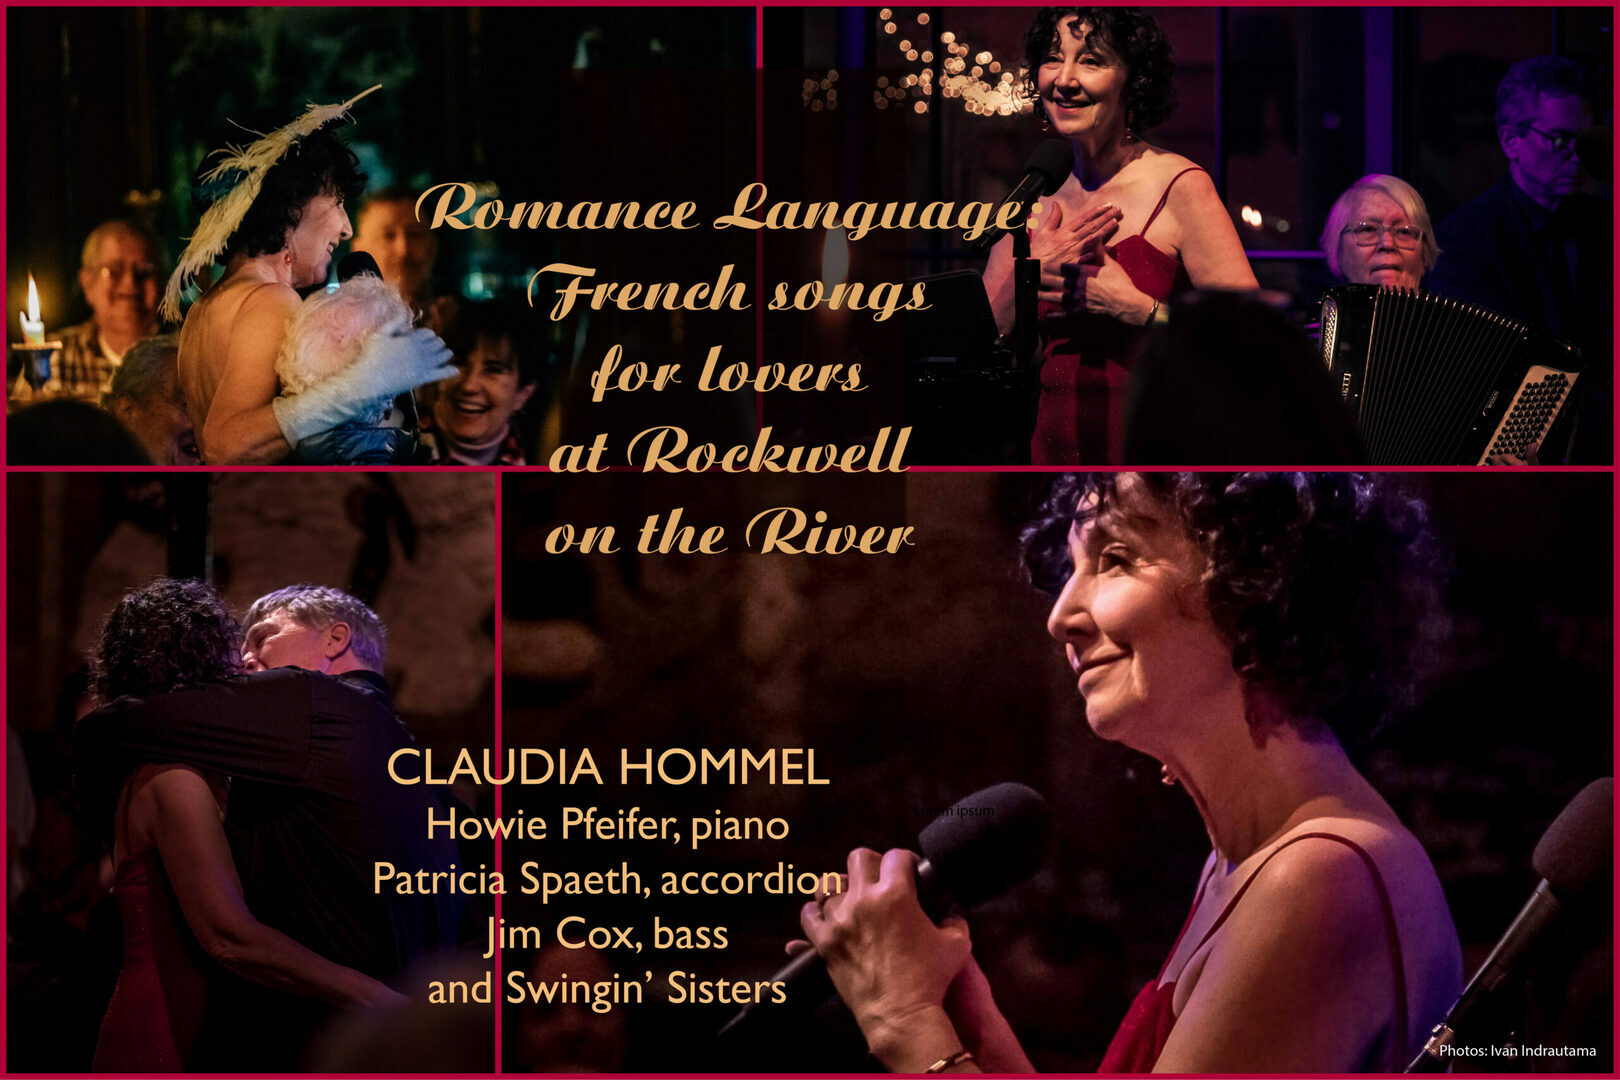 Romance Language: French songs for lovers, Chicago, Illinois, United States